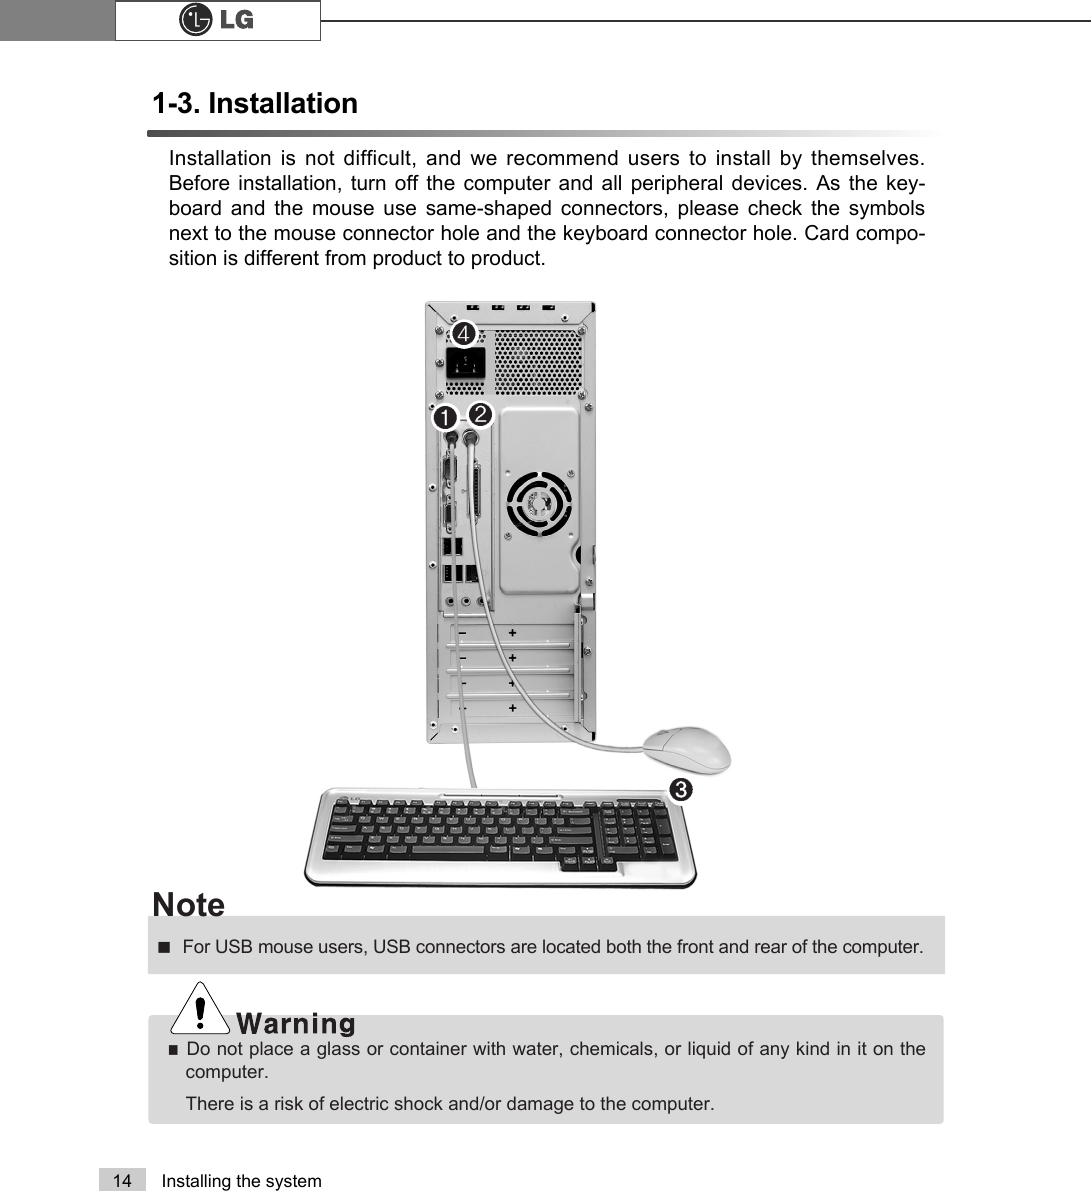 14 Installing the system1-3. InstallationInstallation is not difficult, and we recommend users to install by themselves.Before installation, turn off the computer and all peripheral devices. As the key-board and the mouse use same-shaped connectors, please check the symbolsnext to the mouse connector hole and the keyboard connector hole. Card compo-sition is different from product to product.ãDo not place a glass or container with water, chemicals, or liquid of any kind in it on thecomputer.There is a risk of electric shock and/or damage to the computer.ãFor USB mouse users, USB connectors are located both the front and rear of the computer.Noteℙℚℛ℘